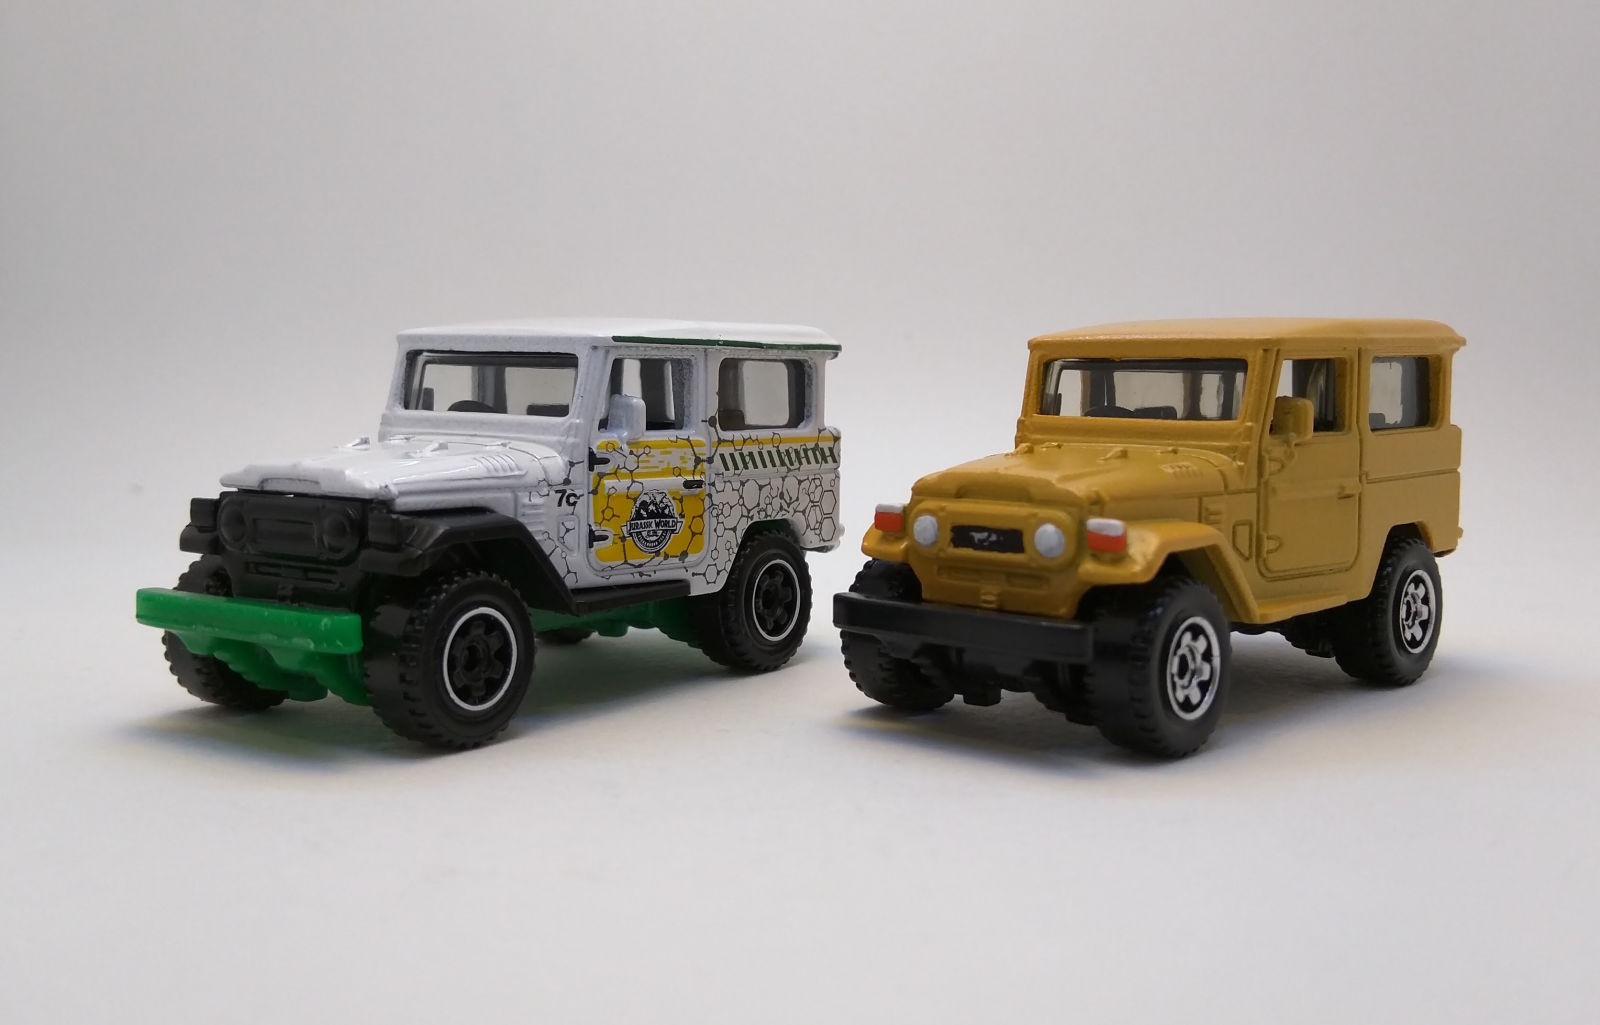 Illustration for article titled The FJ40 Old/New Tool Comparison; or How Matchbox Ruined a Legend